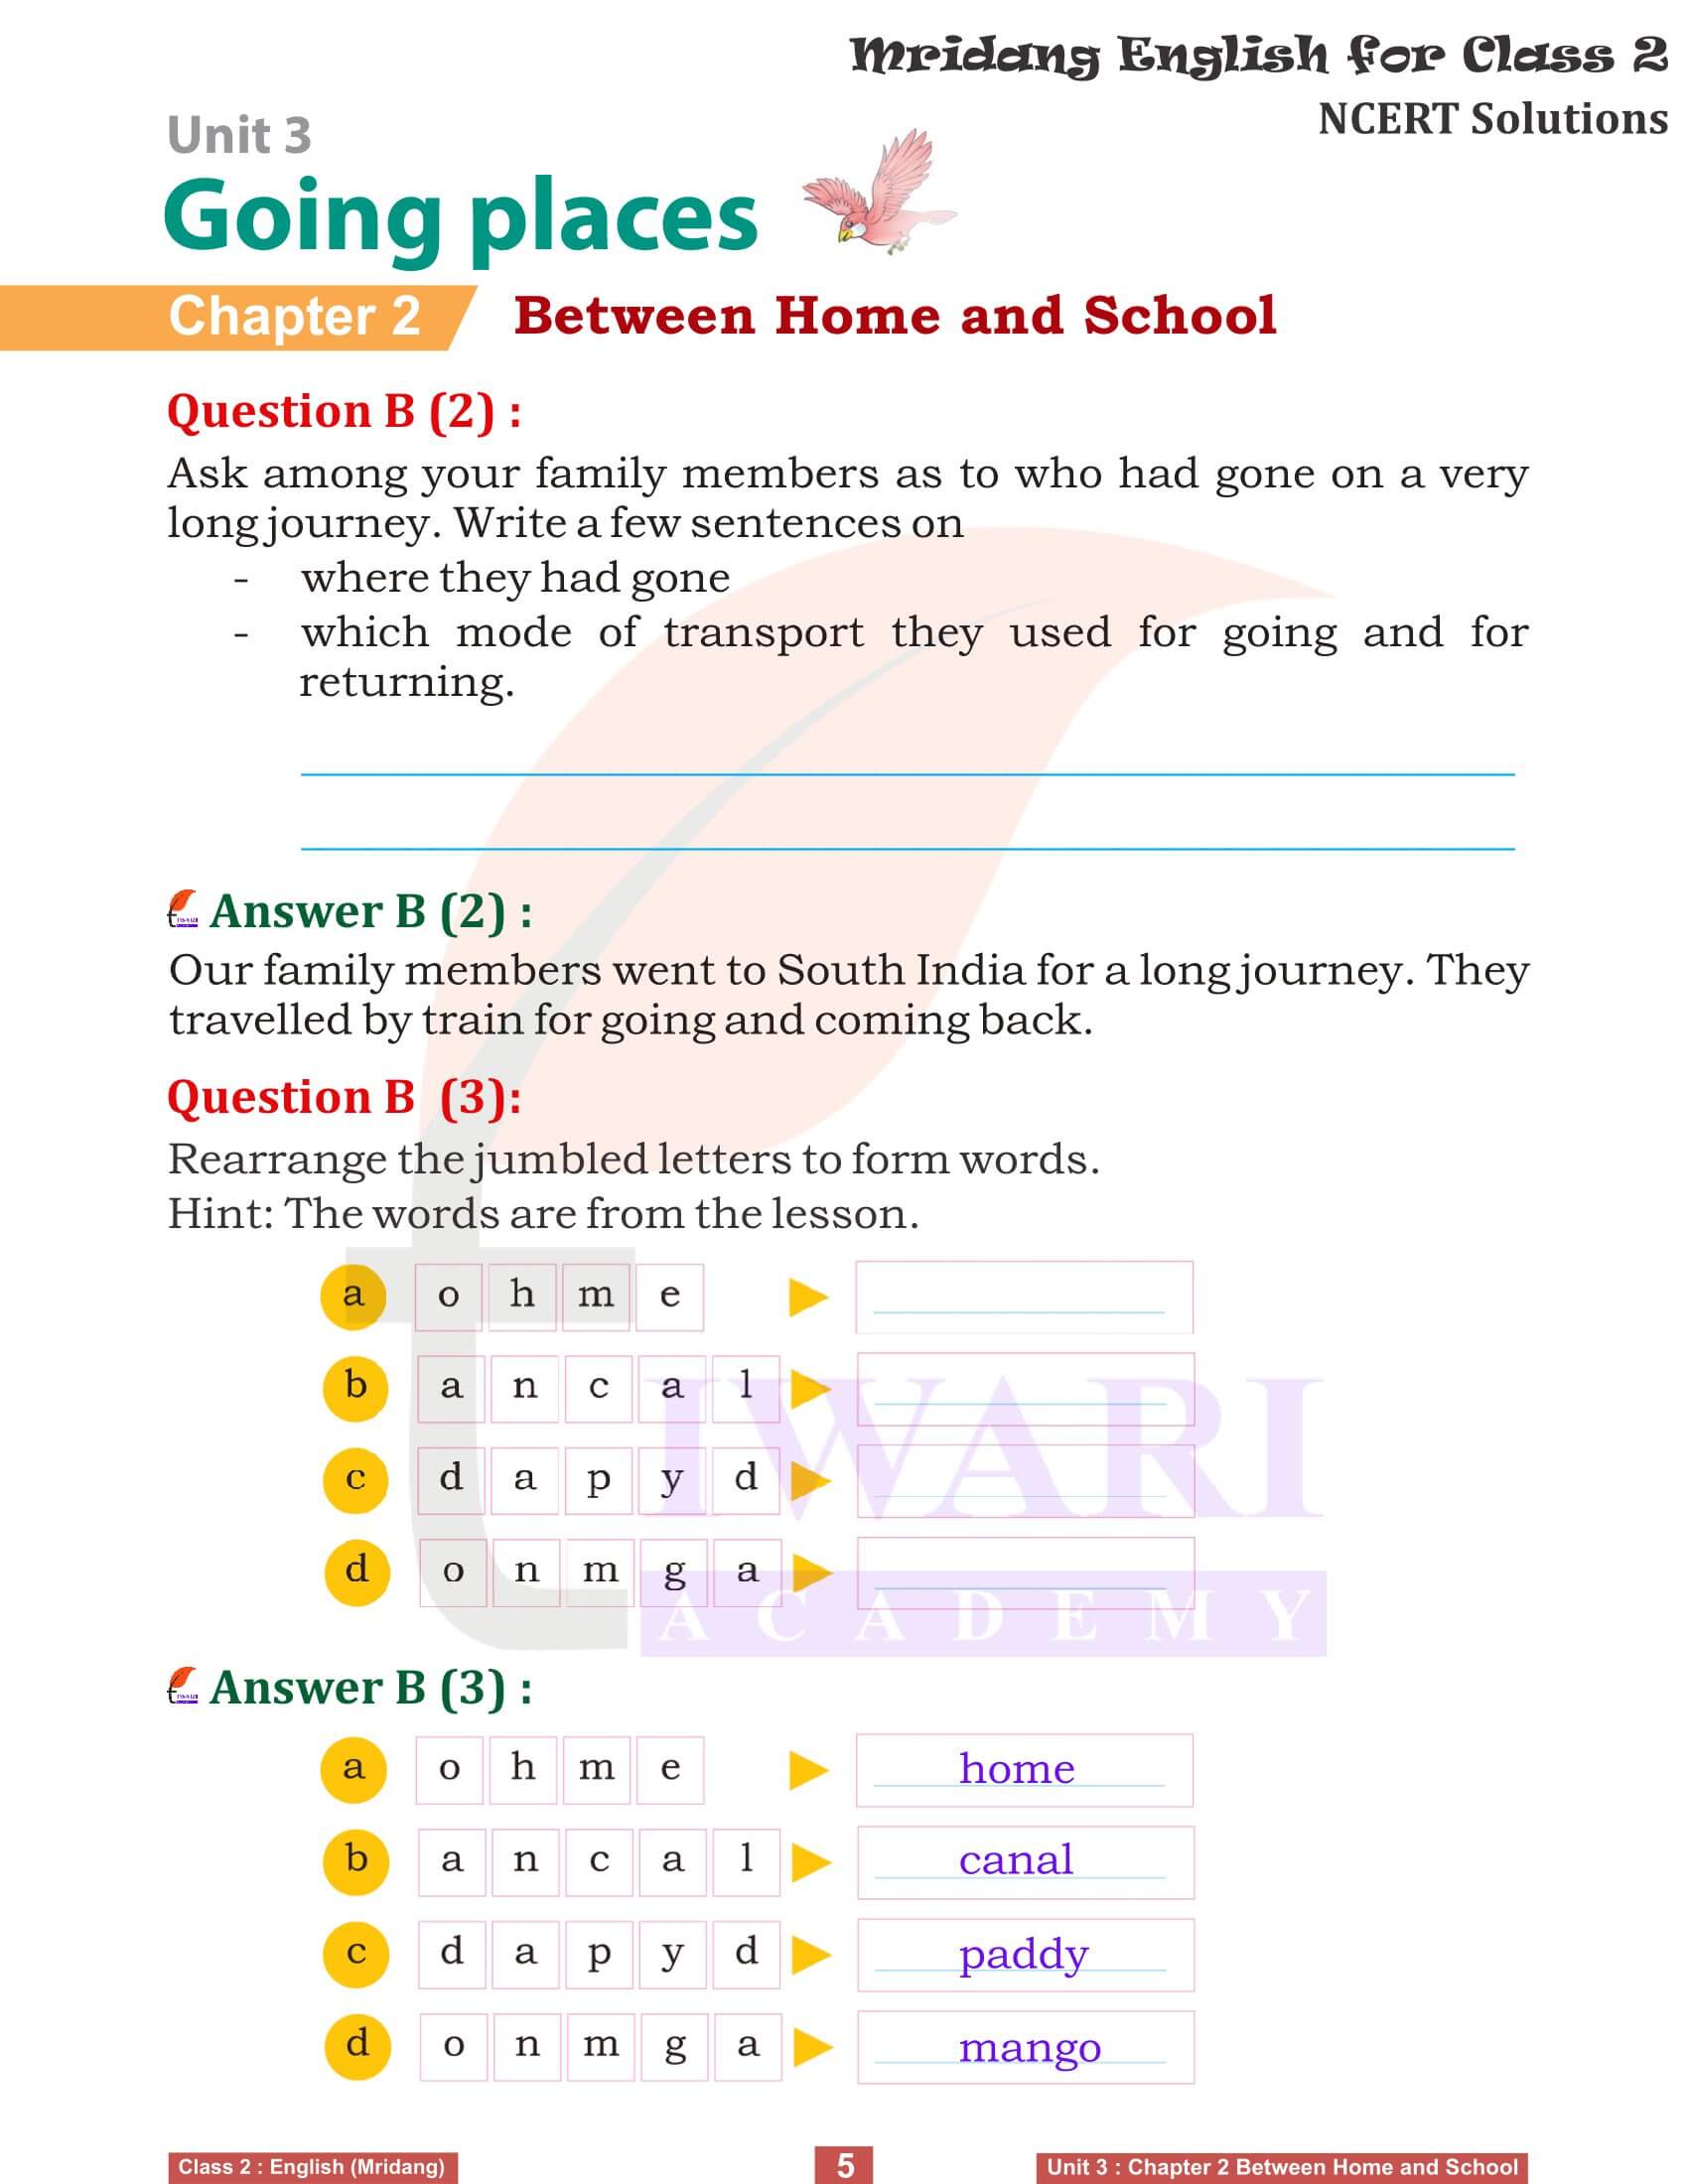 NCERT Solutions for Class 2 English Mridang Unit 3 Going Places Come Back Chapter 2 Between Home and School all answers